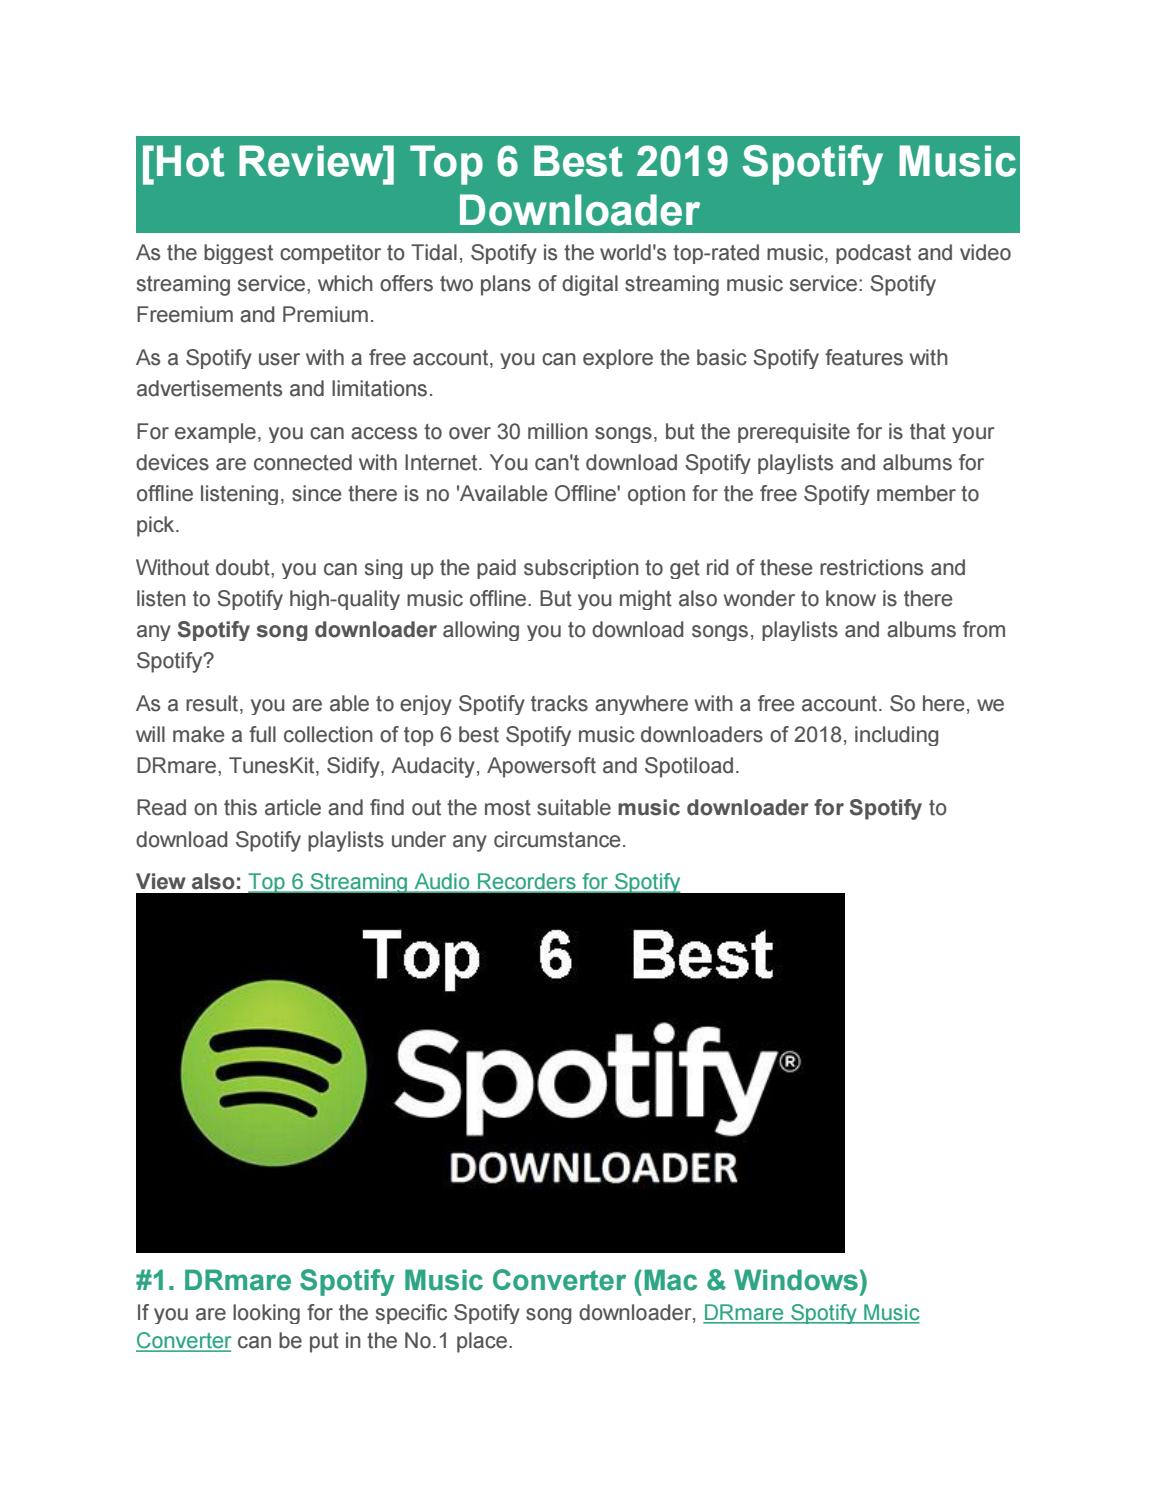 How to download songs from spotify mobile